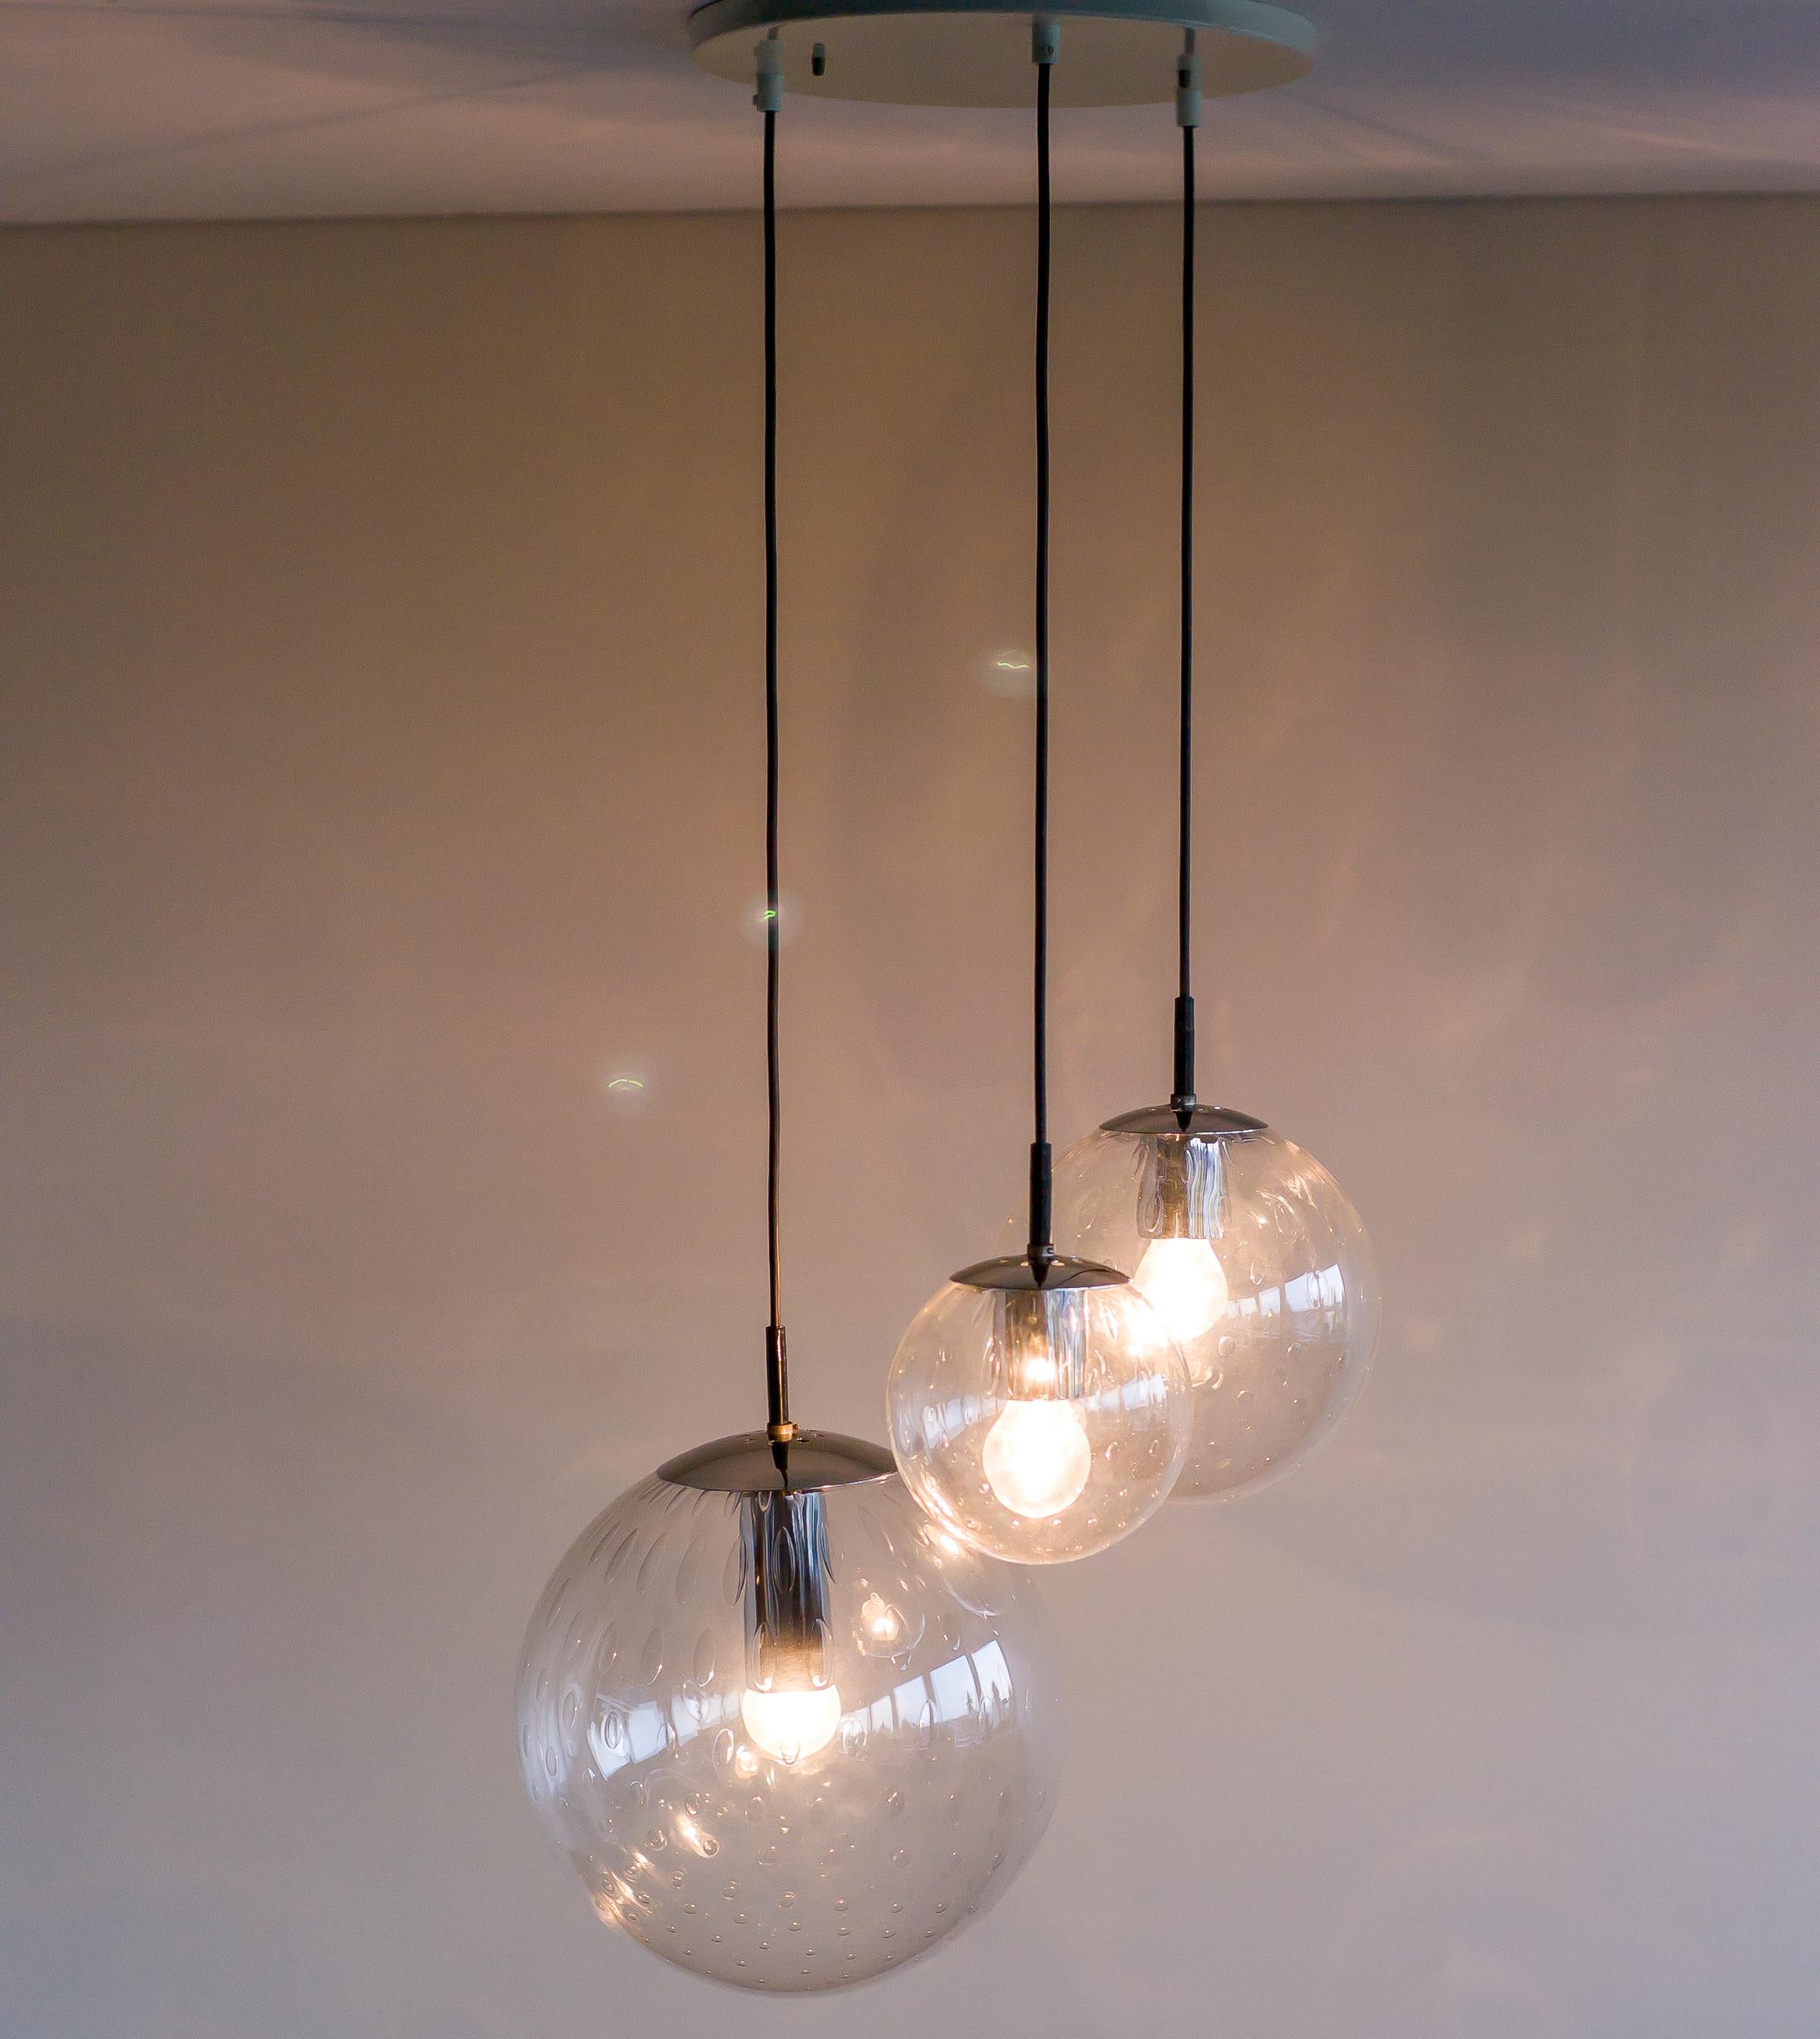 Wonderful chandelier by RAAK with hand blown clear glass spheres with enclosed bubbles.
The diameters of the spheres are 30 cm, 22 cm and 14 cm.
The height of each sphere can be adjusted to create your own composition.

A sophisticated composition